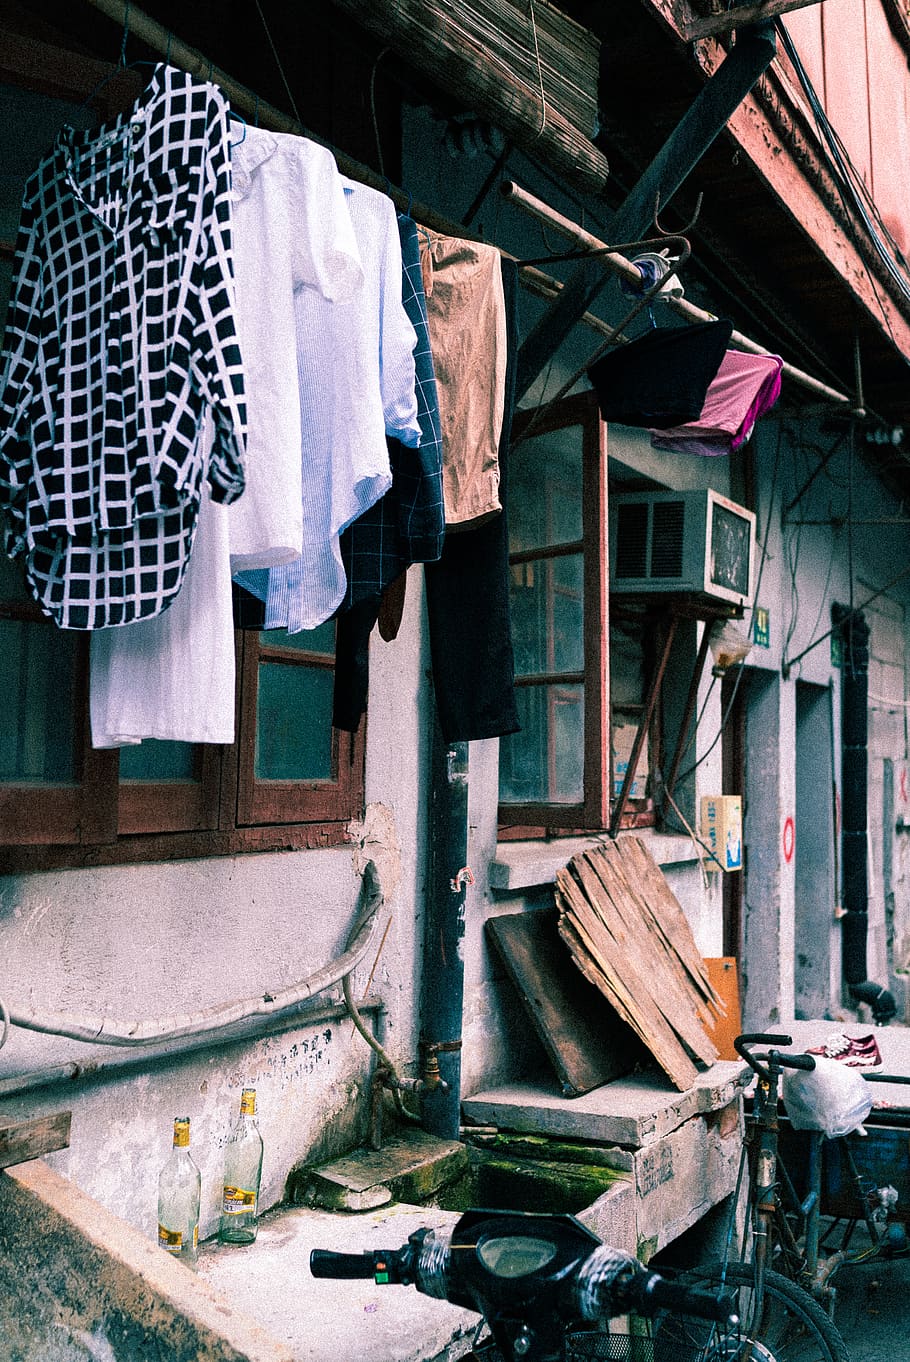 assorted clothes hanged on clothesline outside window, shanghai, HD wallpaper